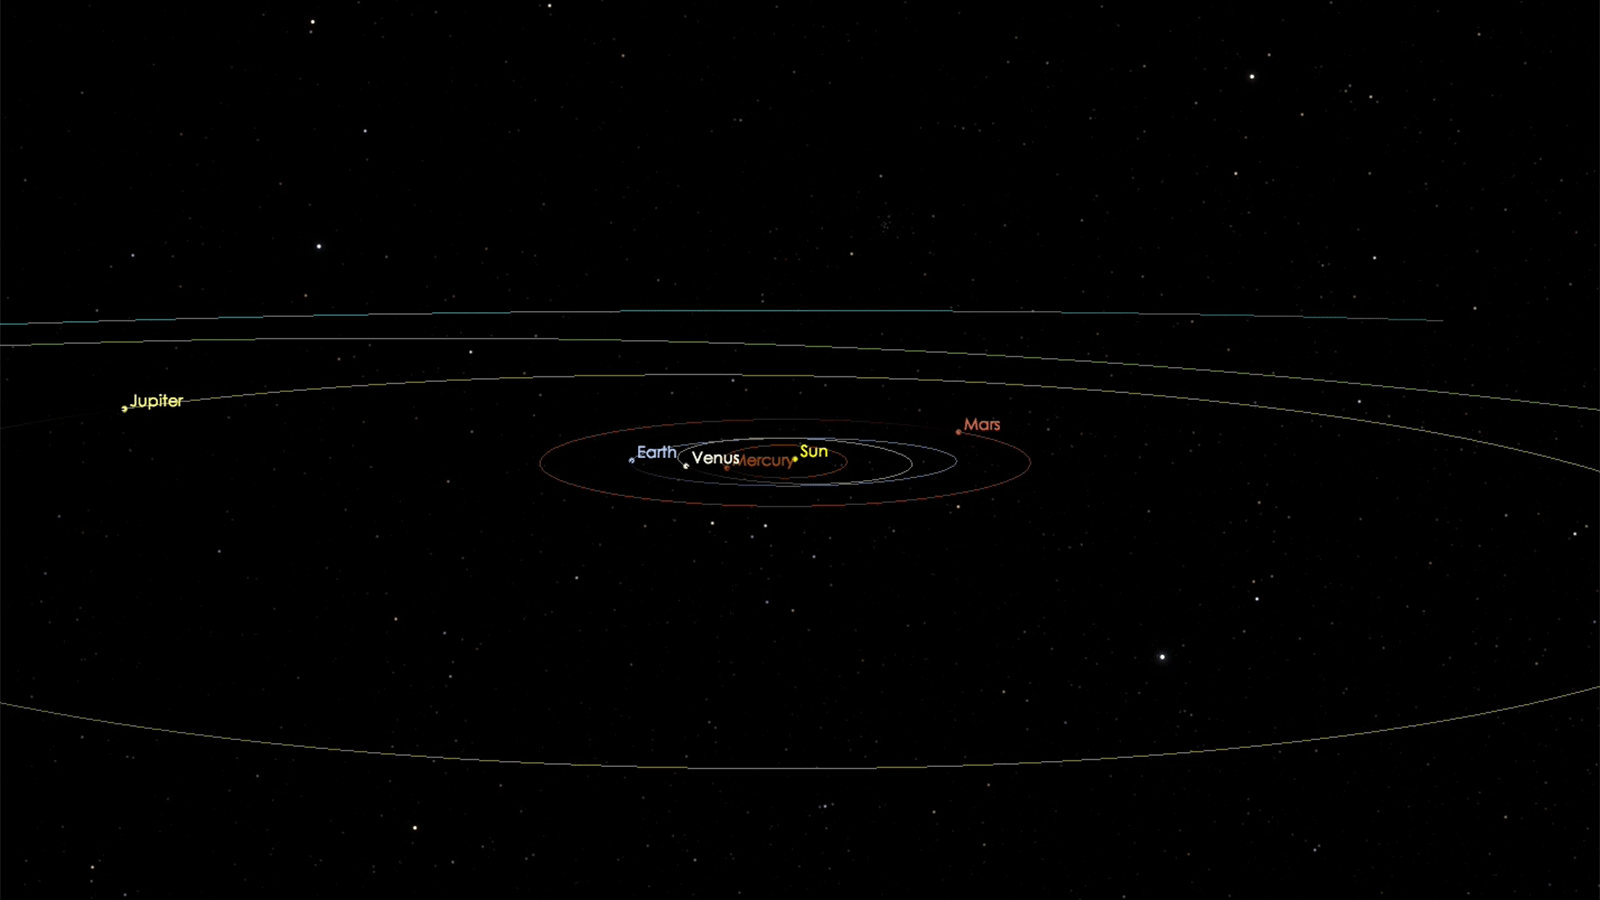 animation of oumuamua and solar system orbits